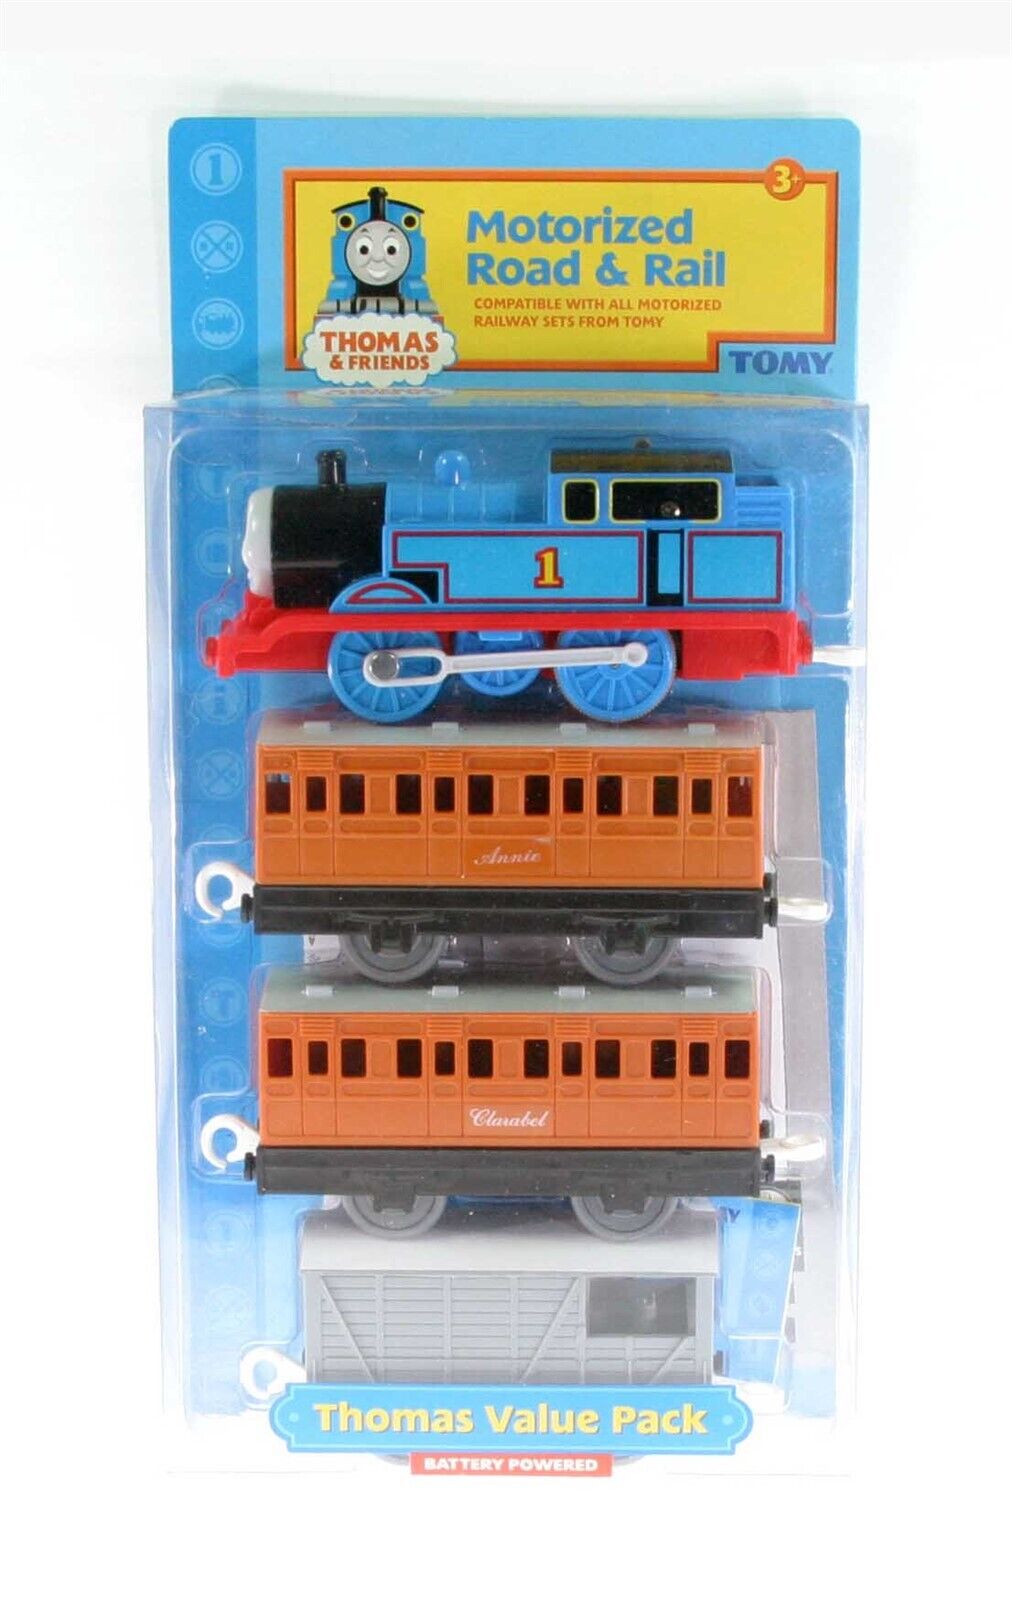 TOMY Thomas & Friends Motorized Road & Rail Thomas Value Pack 04808 Great Deal